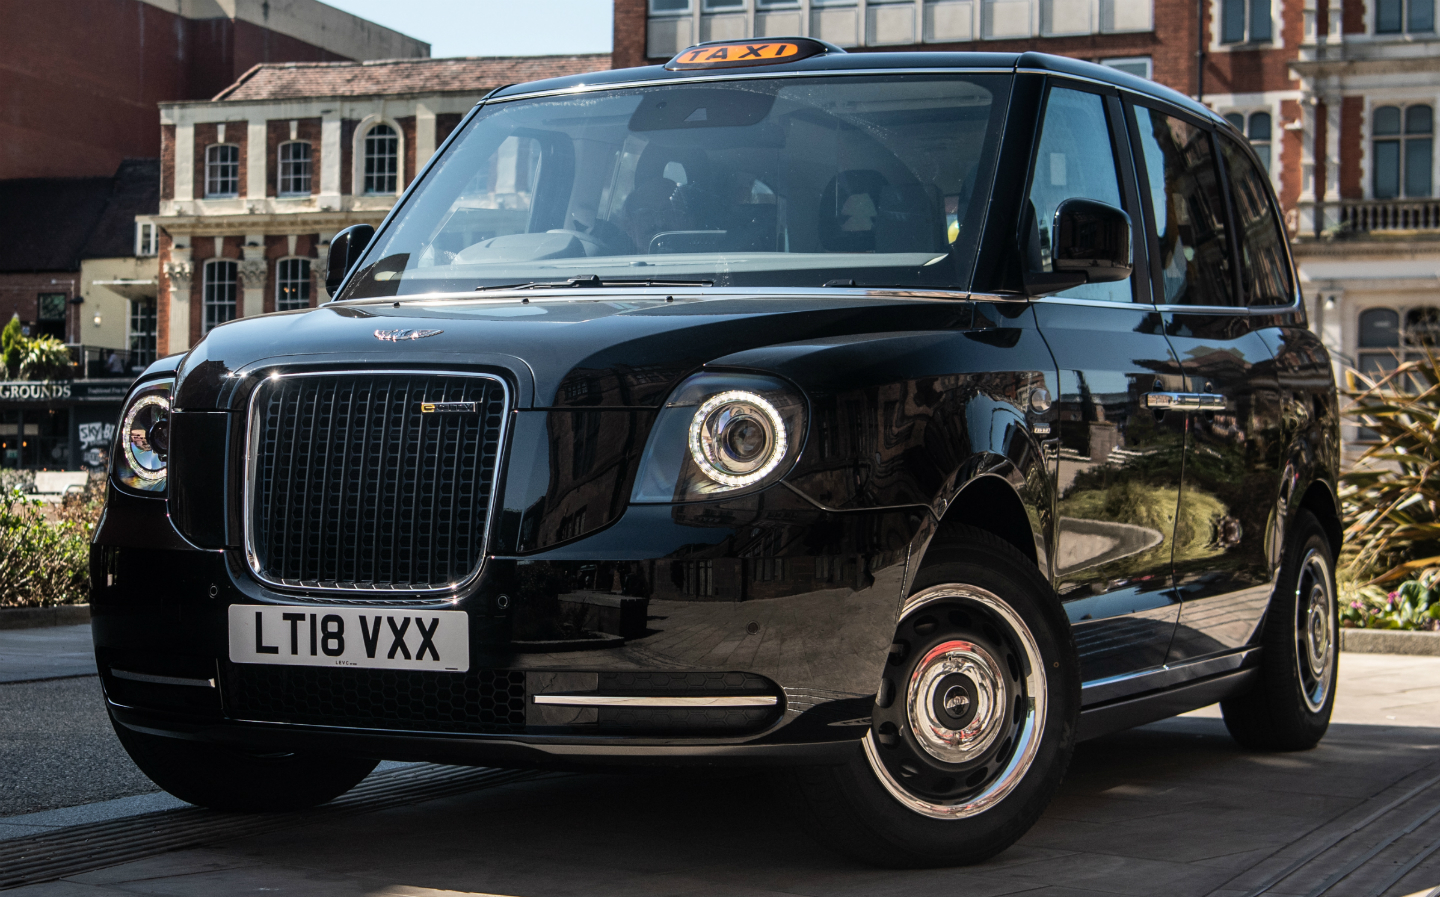 Sunday Times Motor Awards 2019 Best British-Built Car of the Year. LEVC TX Taxi